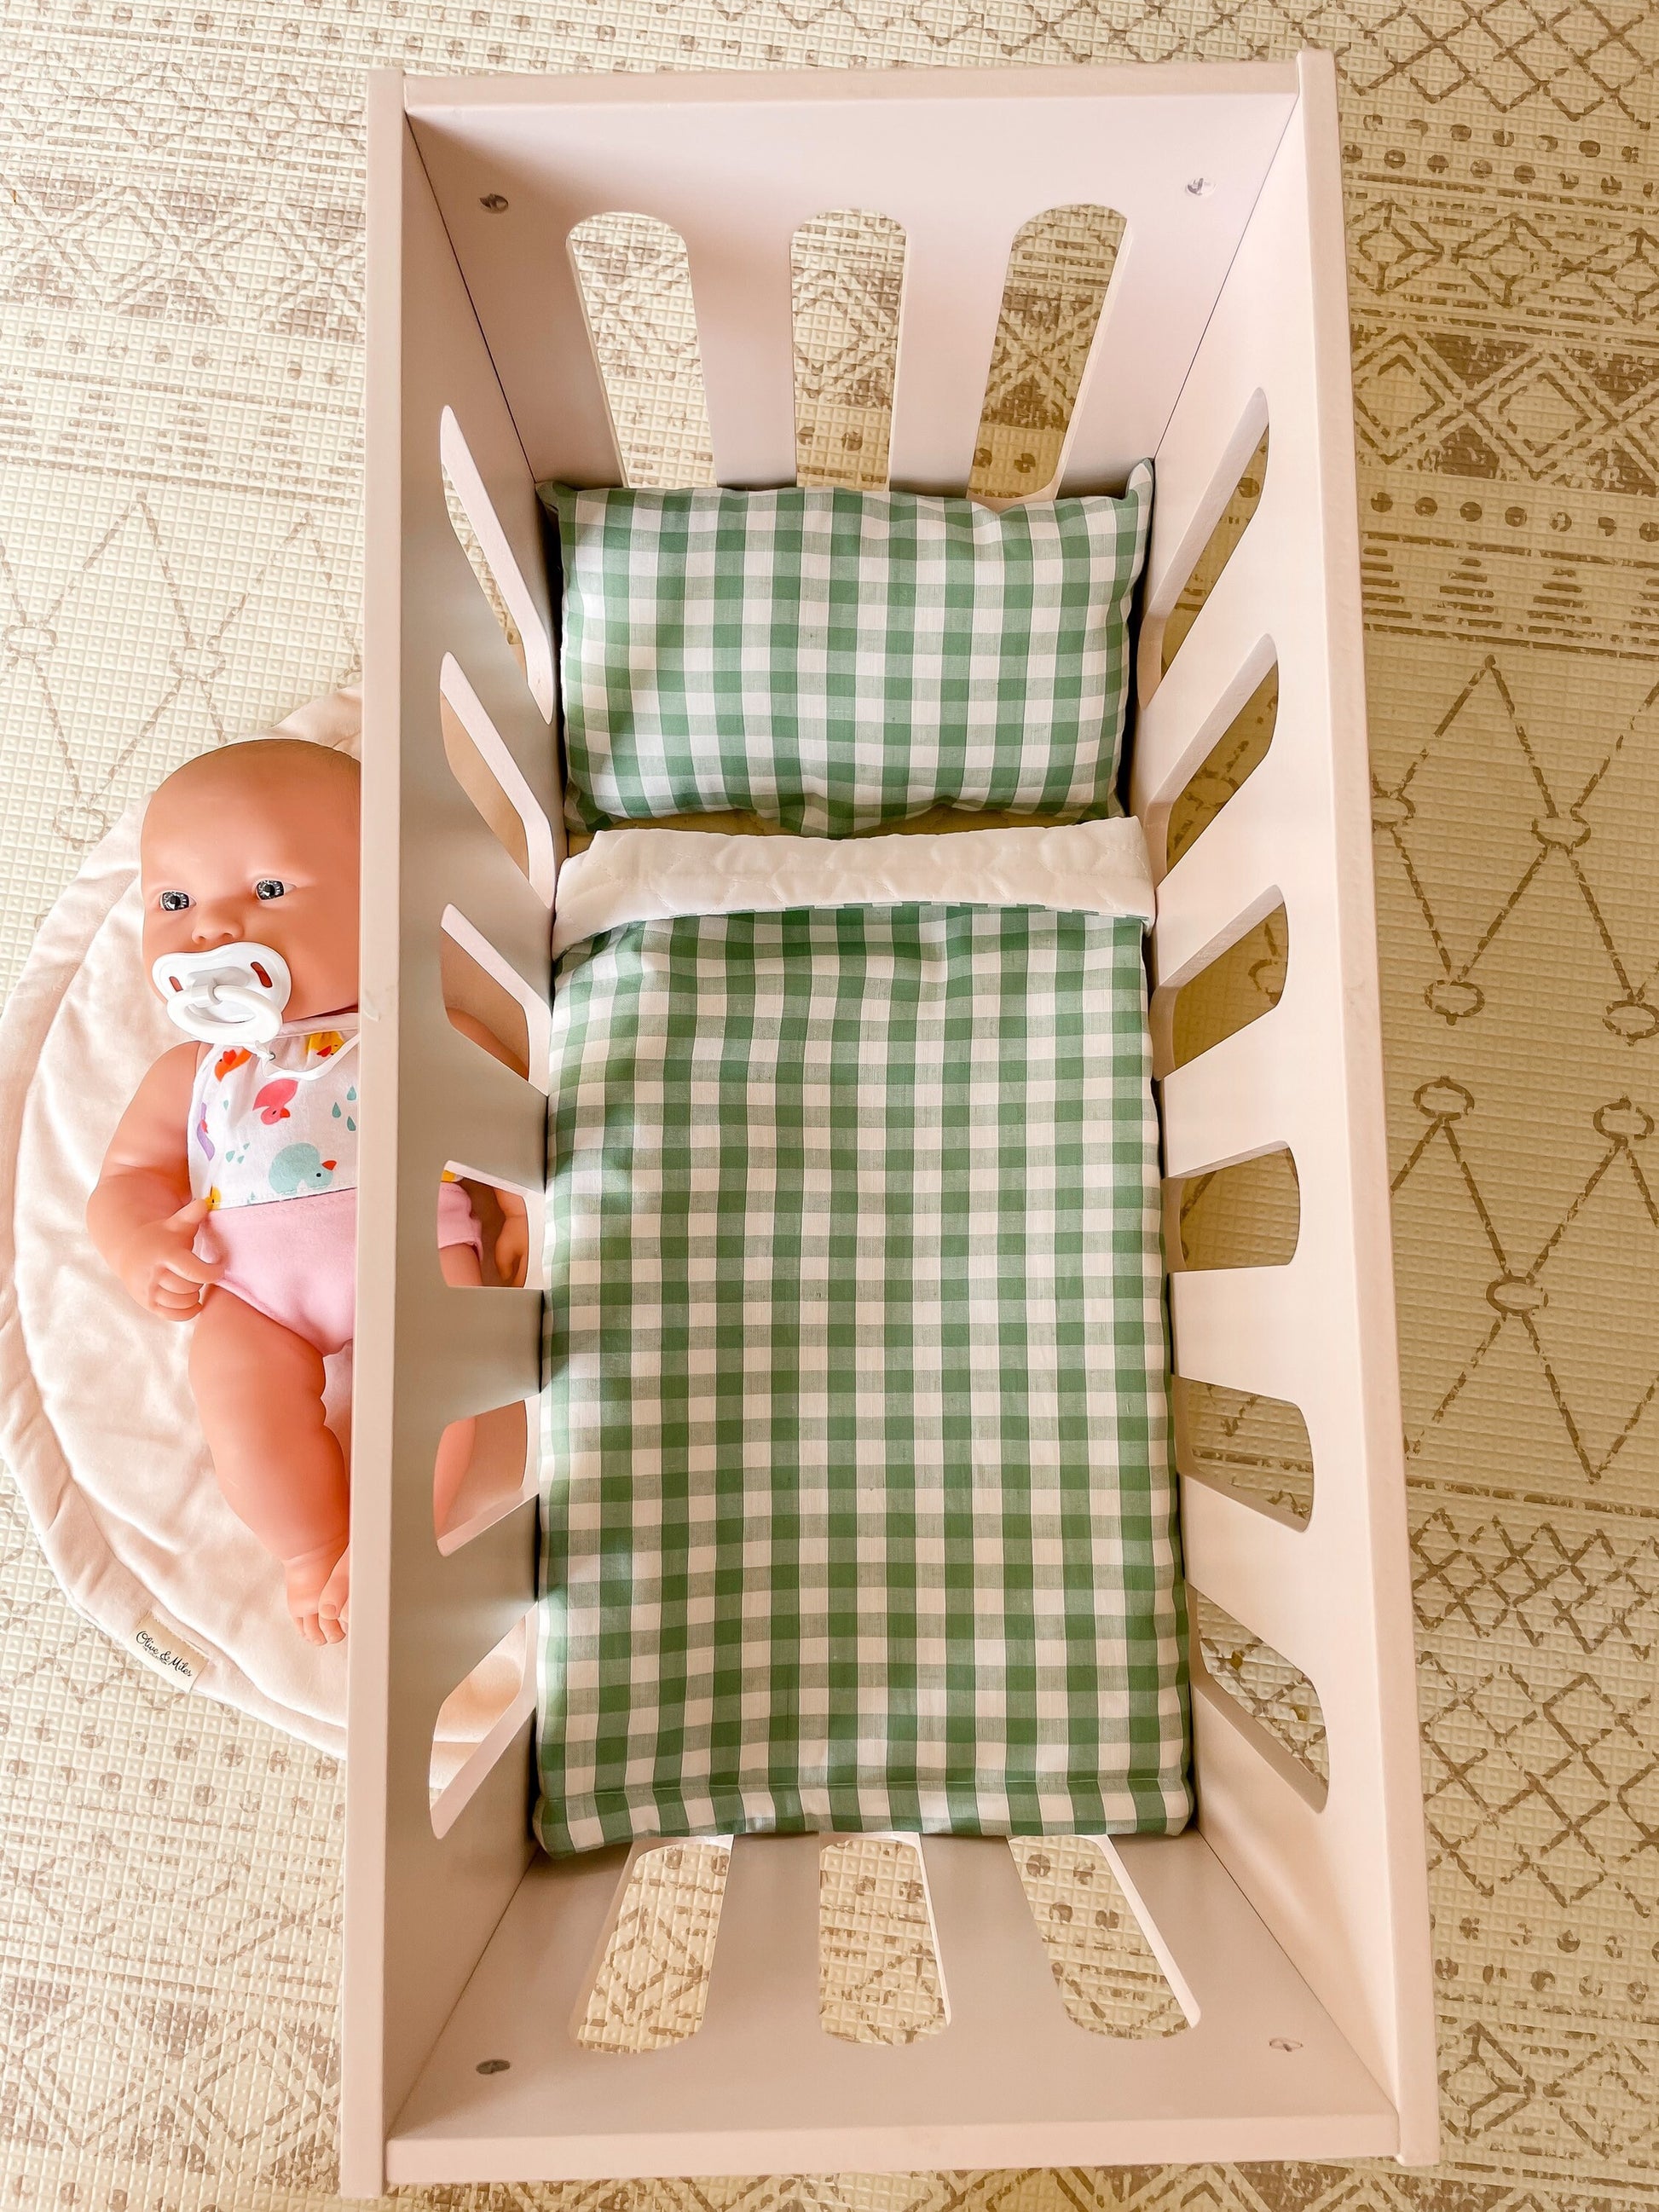 Gingham Doll Bedding | Gift for nephew | Crib sheet and pillow toy set | Doll Bed Cover Linen | Cot Blanket | Crib Bedding | Pram Pillows